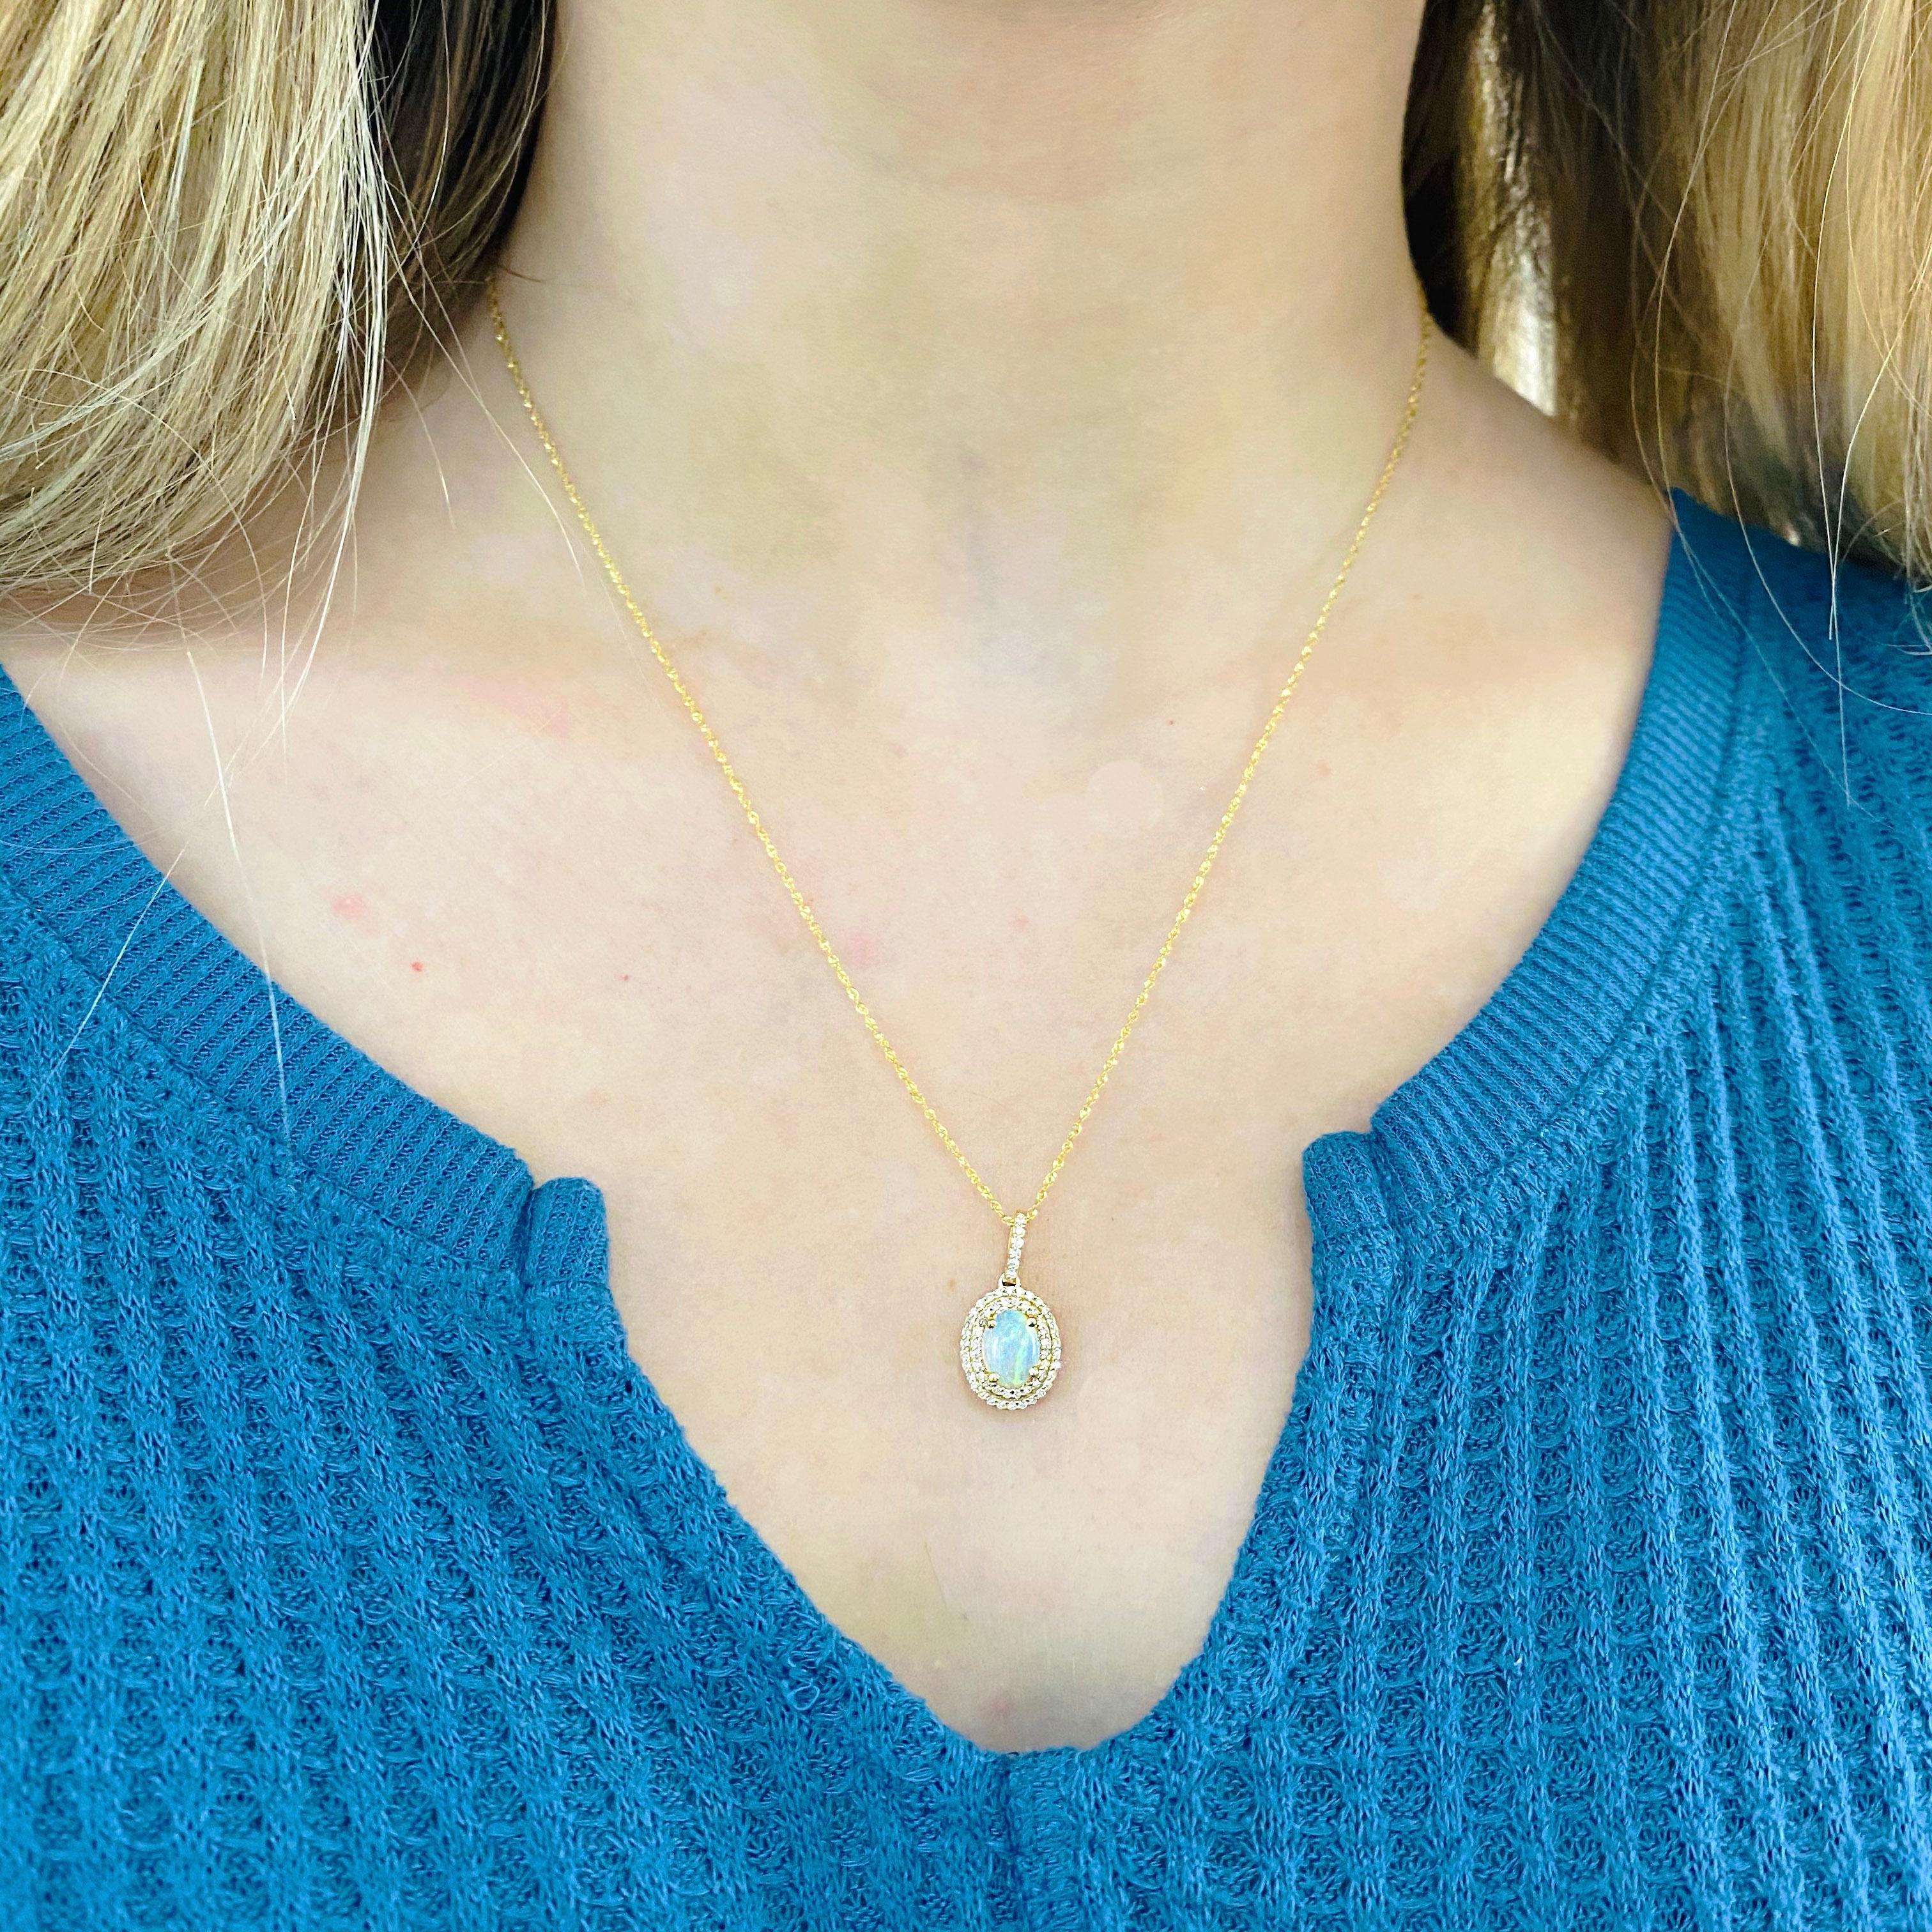 This stunningly beautiful white opal set in polished 14k yellow gold and dripping with a double halo of diamonds provide a look that is very modern yet classic! This necklace is very fashionable and can add a touch of style to any outfit, yet it is